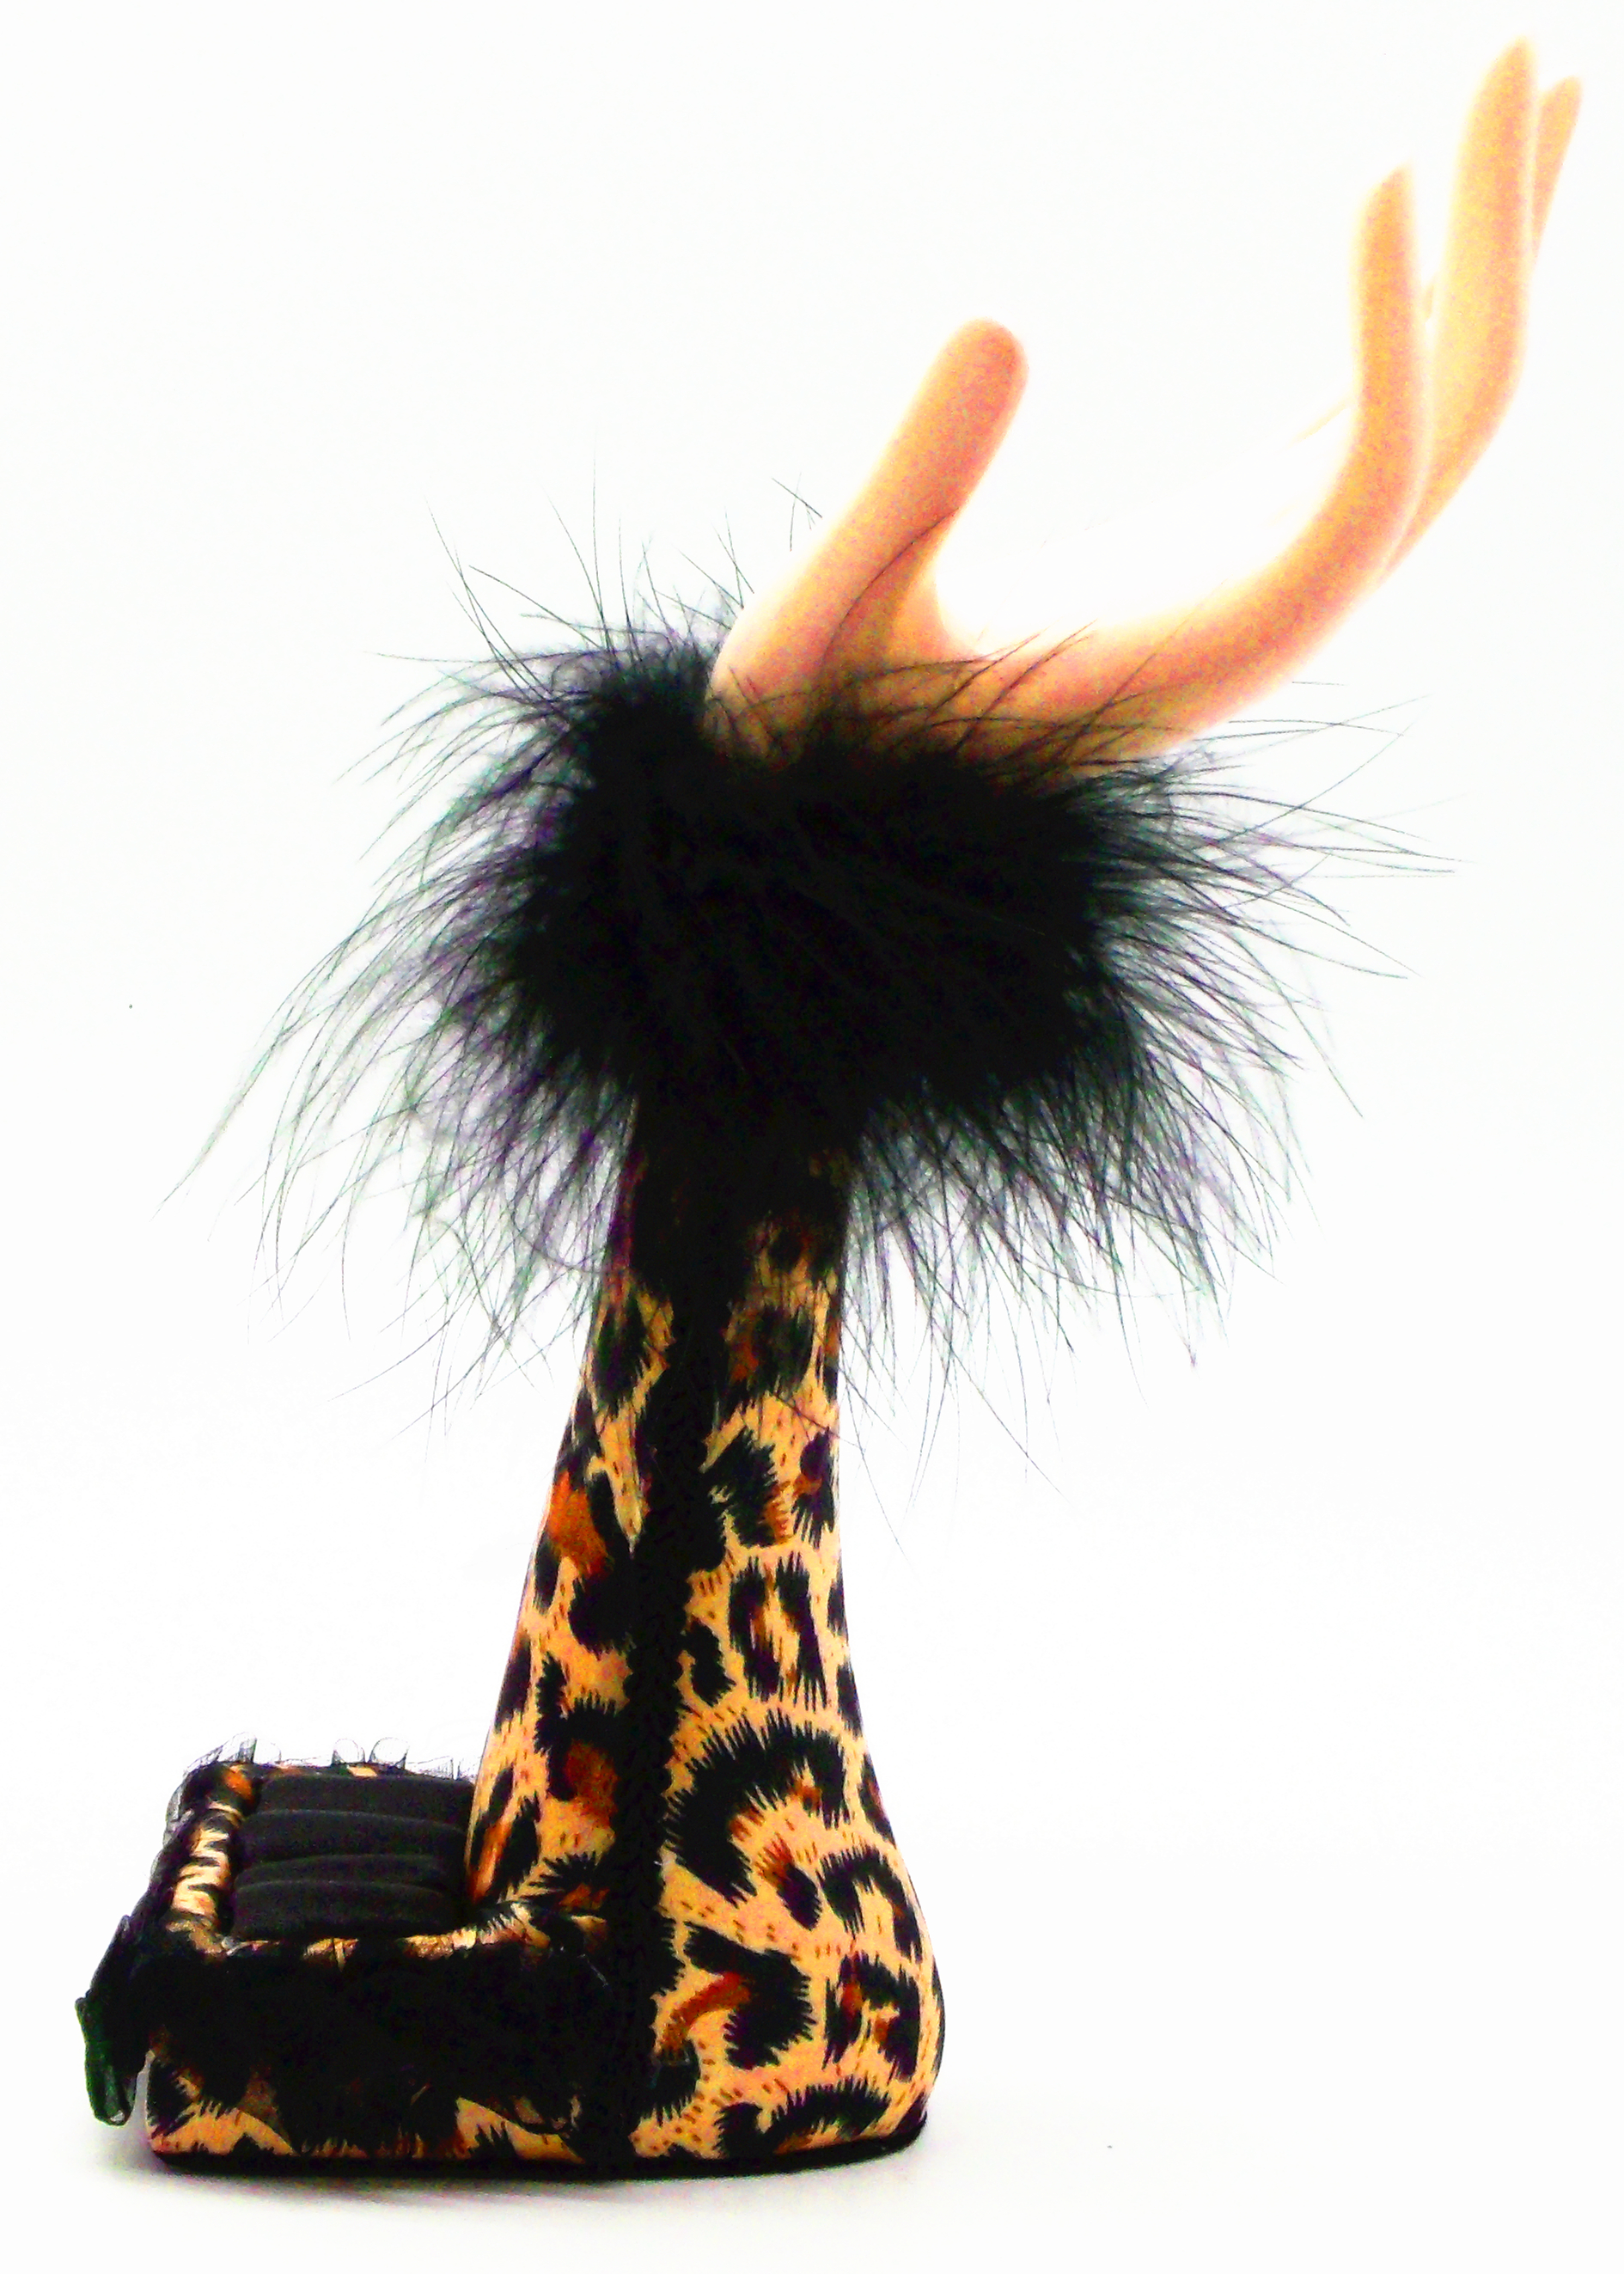 GEORGE & JIMMY Leopard Jewelry Display Holder Bracelet Ring Watch Stand Support Holder Stand Black  And Beige Color